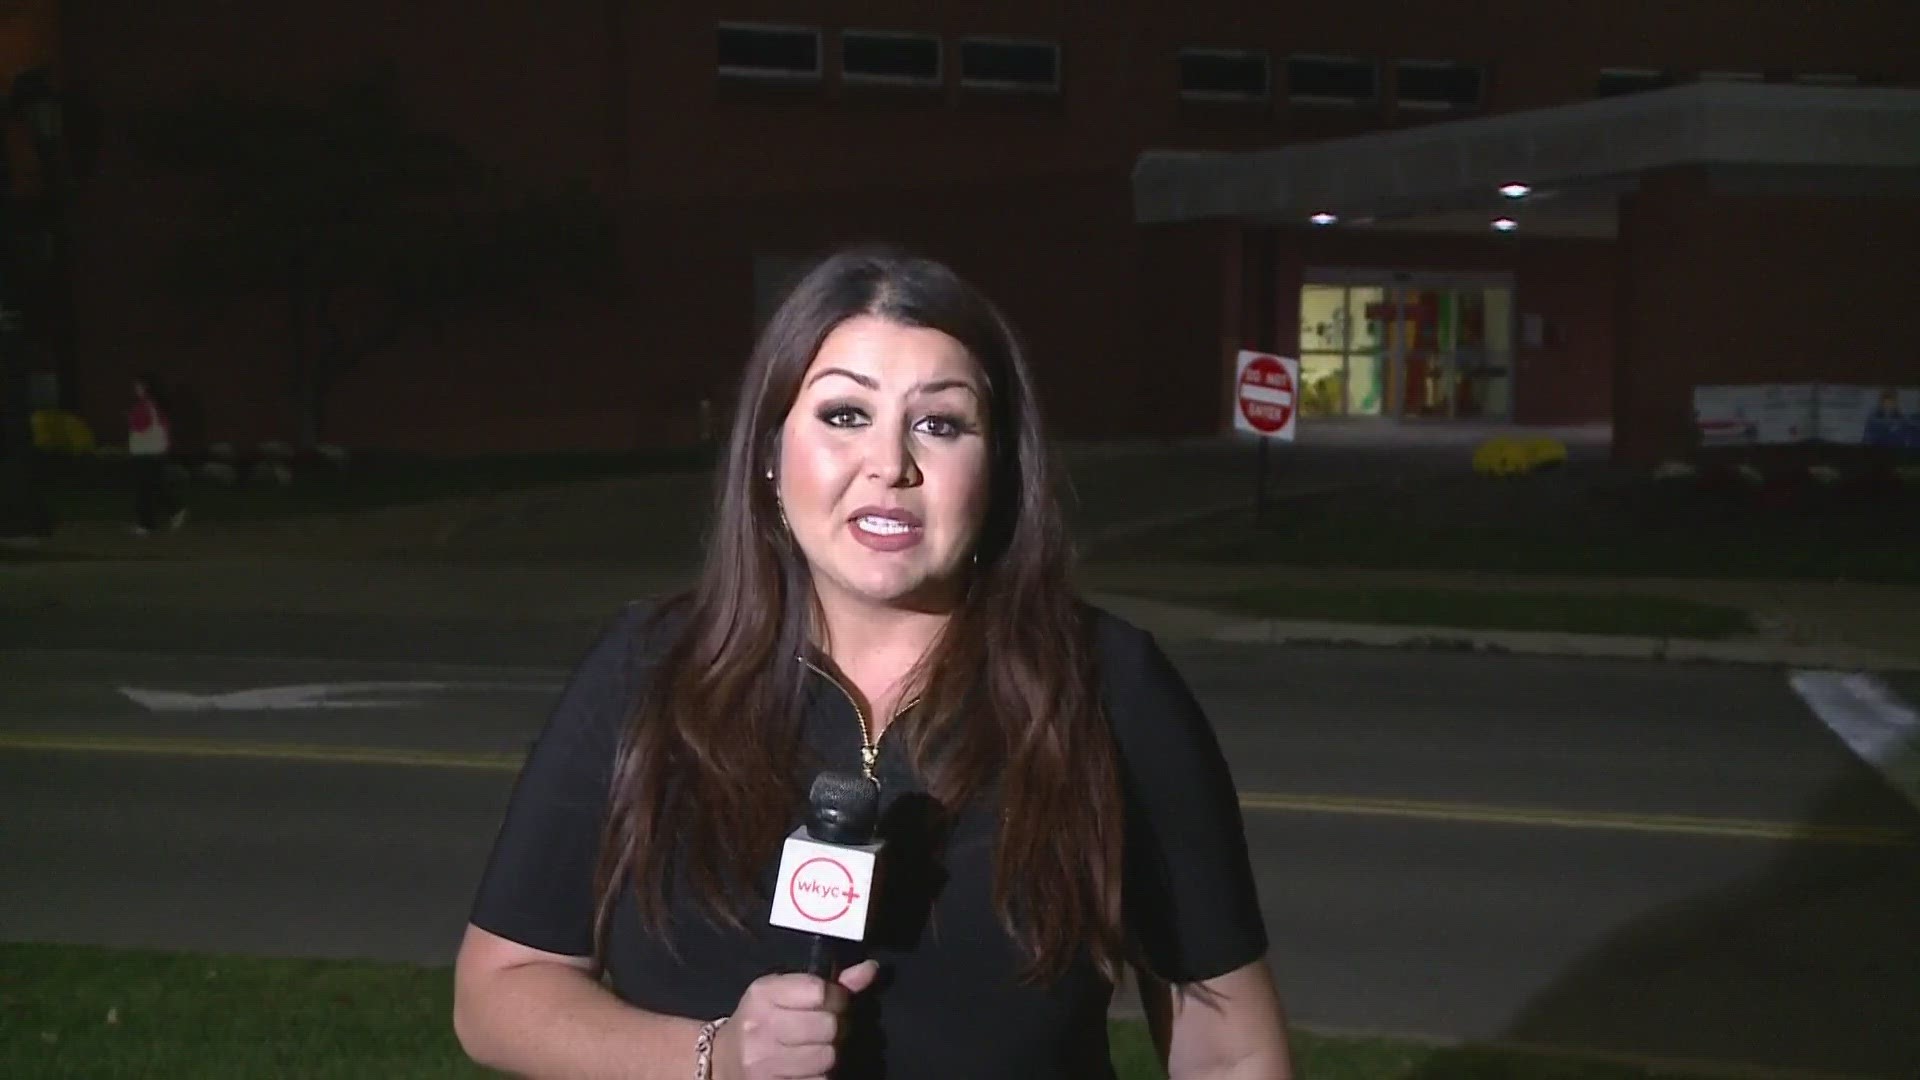 Multiple departments have responded to reports of someone shooting at motorcyclists. One biker told 3News' Bri Buckley that one of their friends had died.